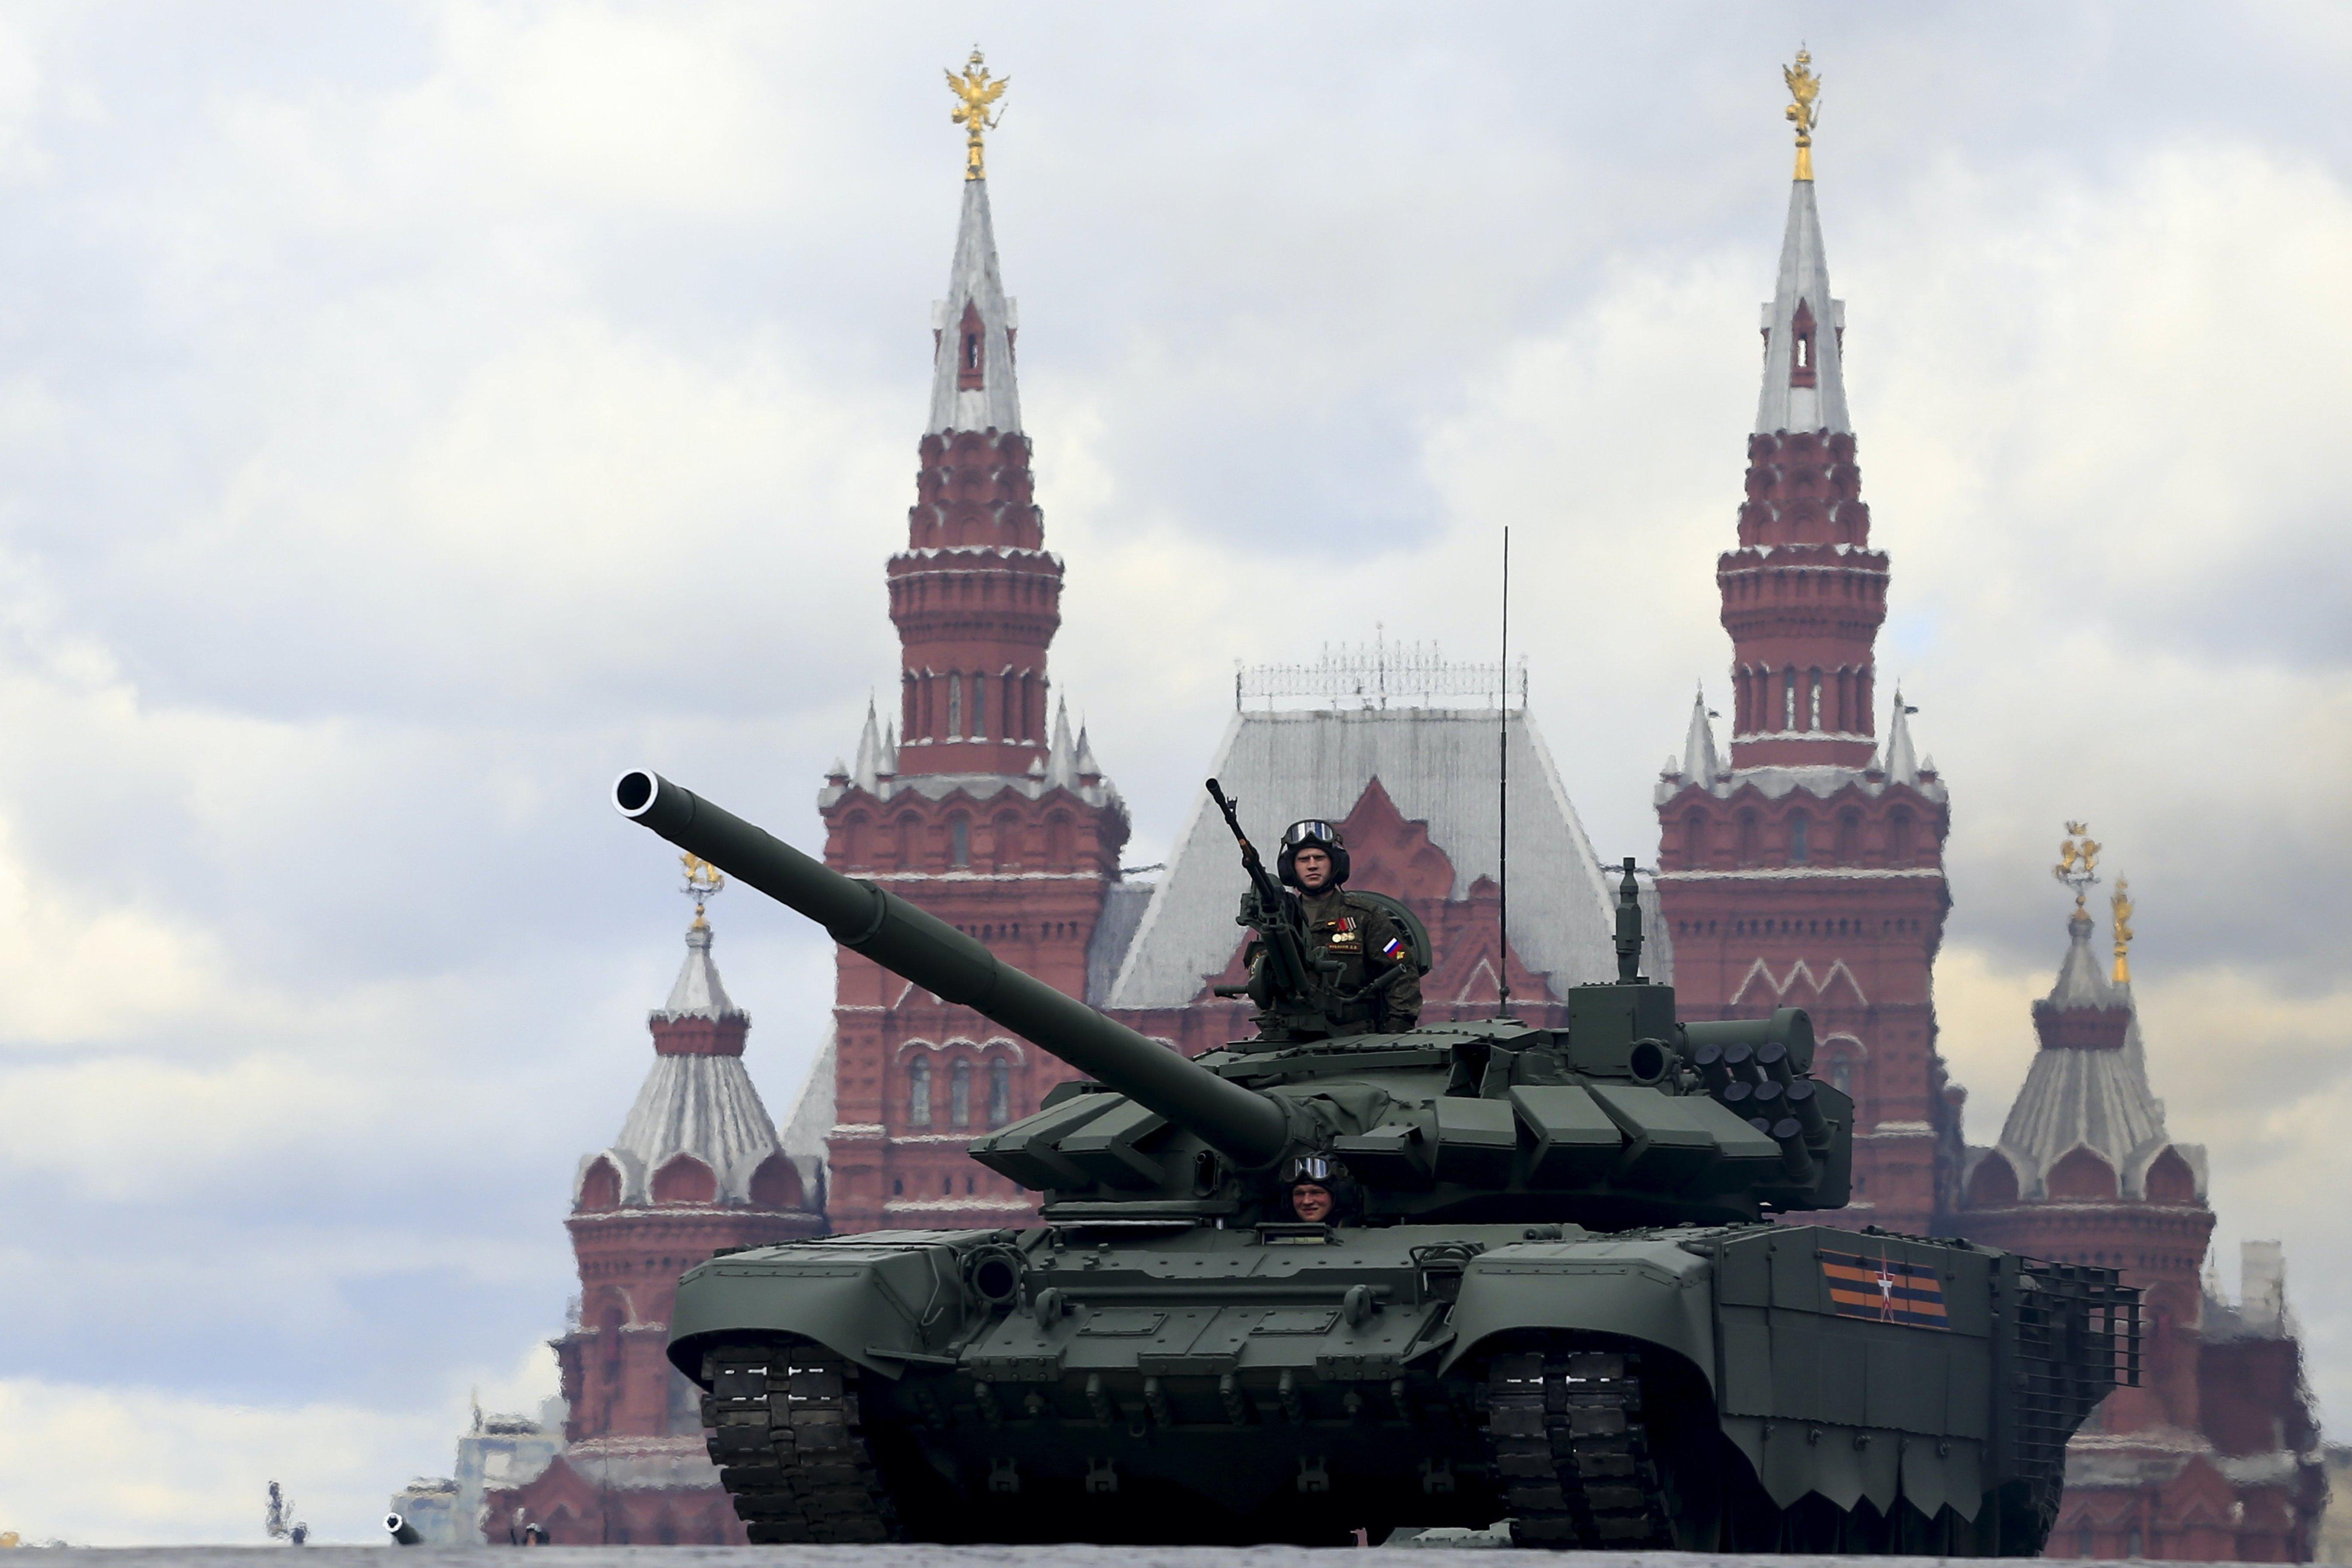 Russian military vehicle performs during a rehearsal for the Victory Day military parade at Red Square in Moscow, Russia on May 07, 2021.